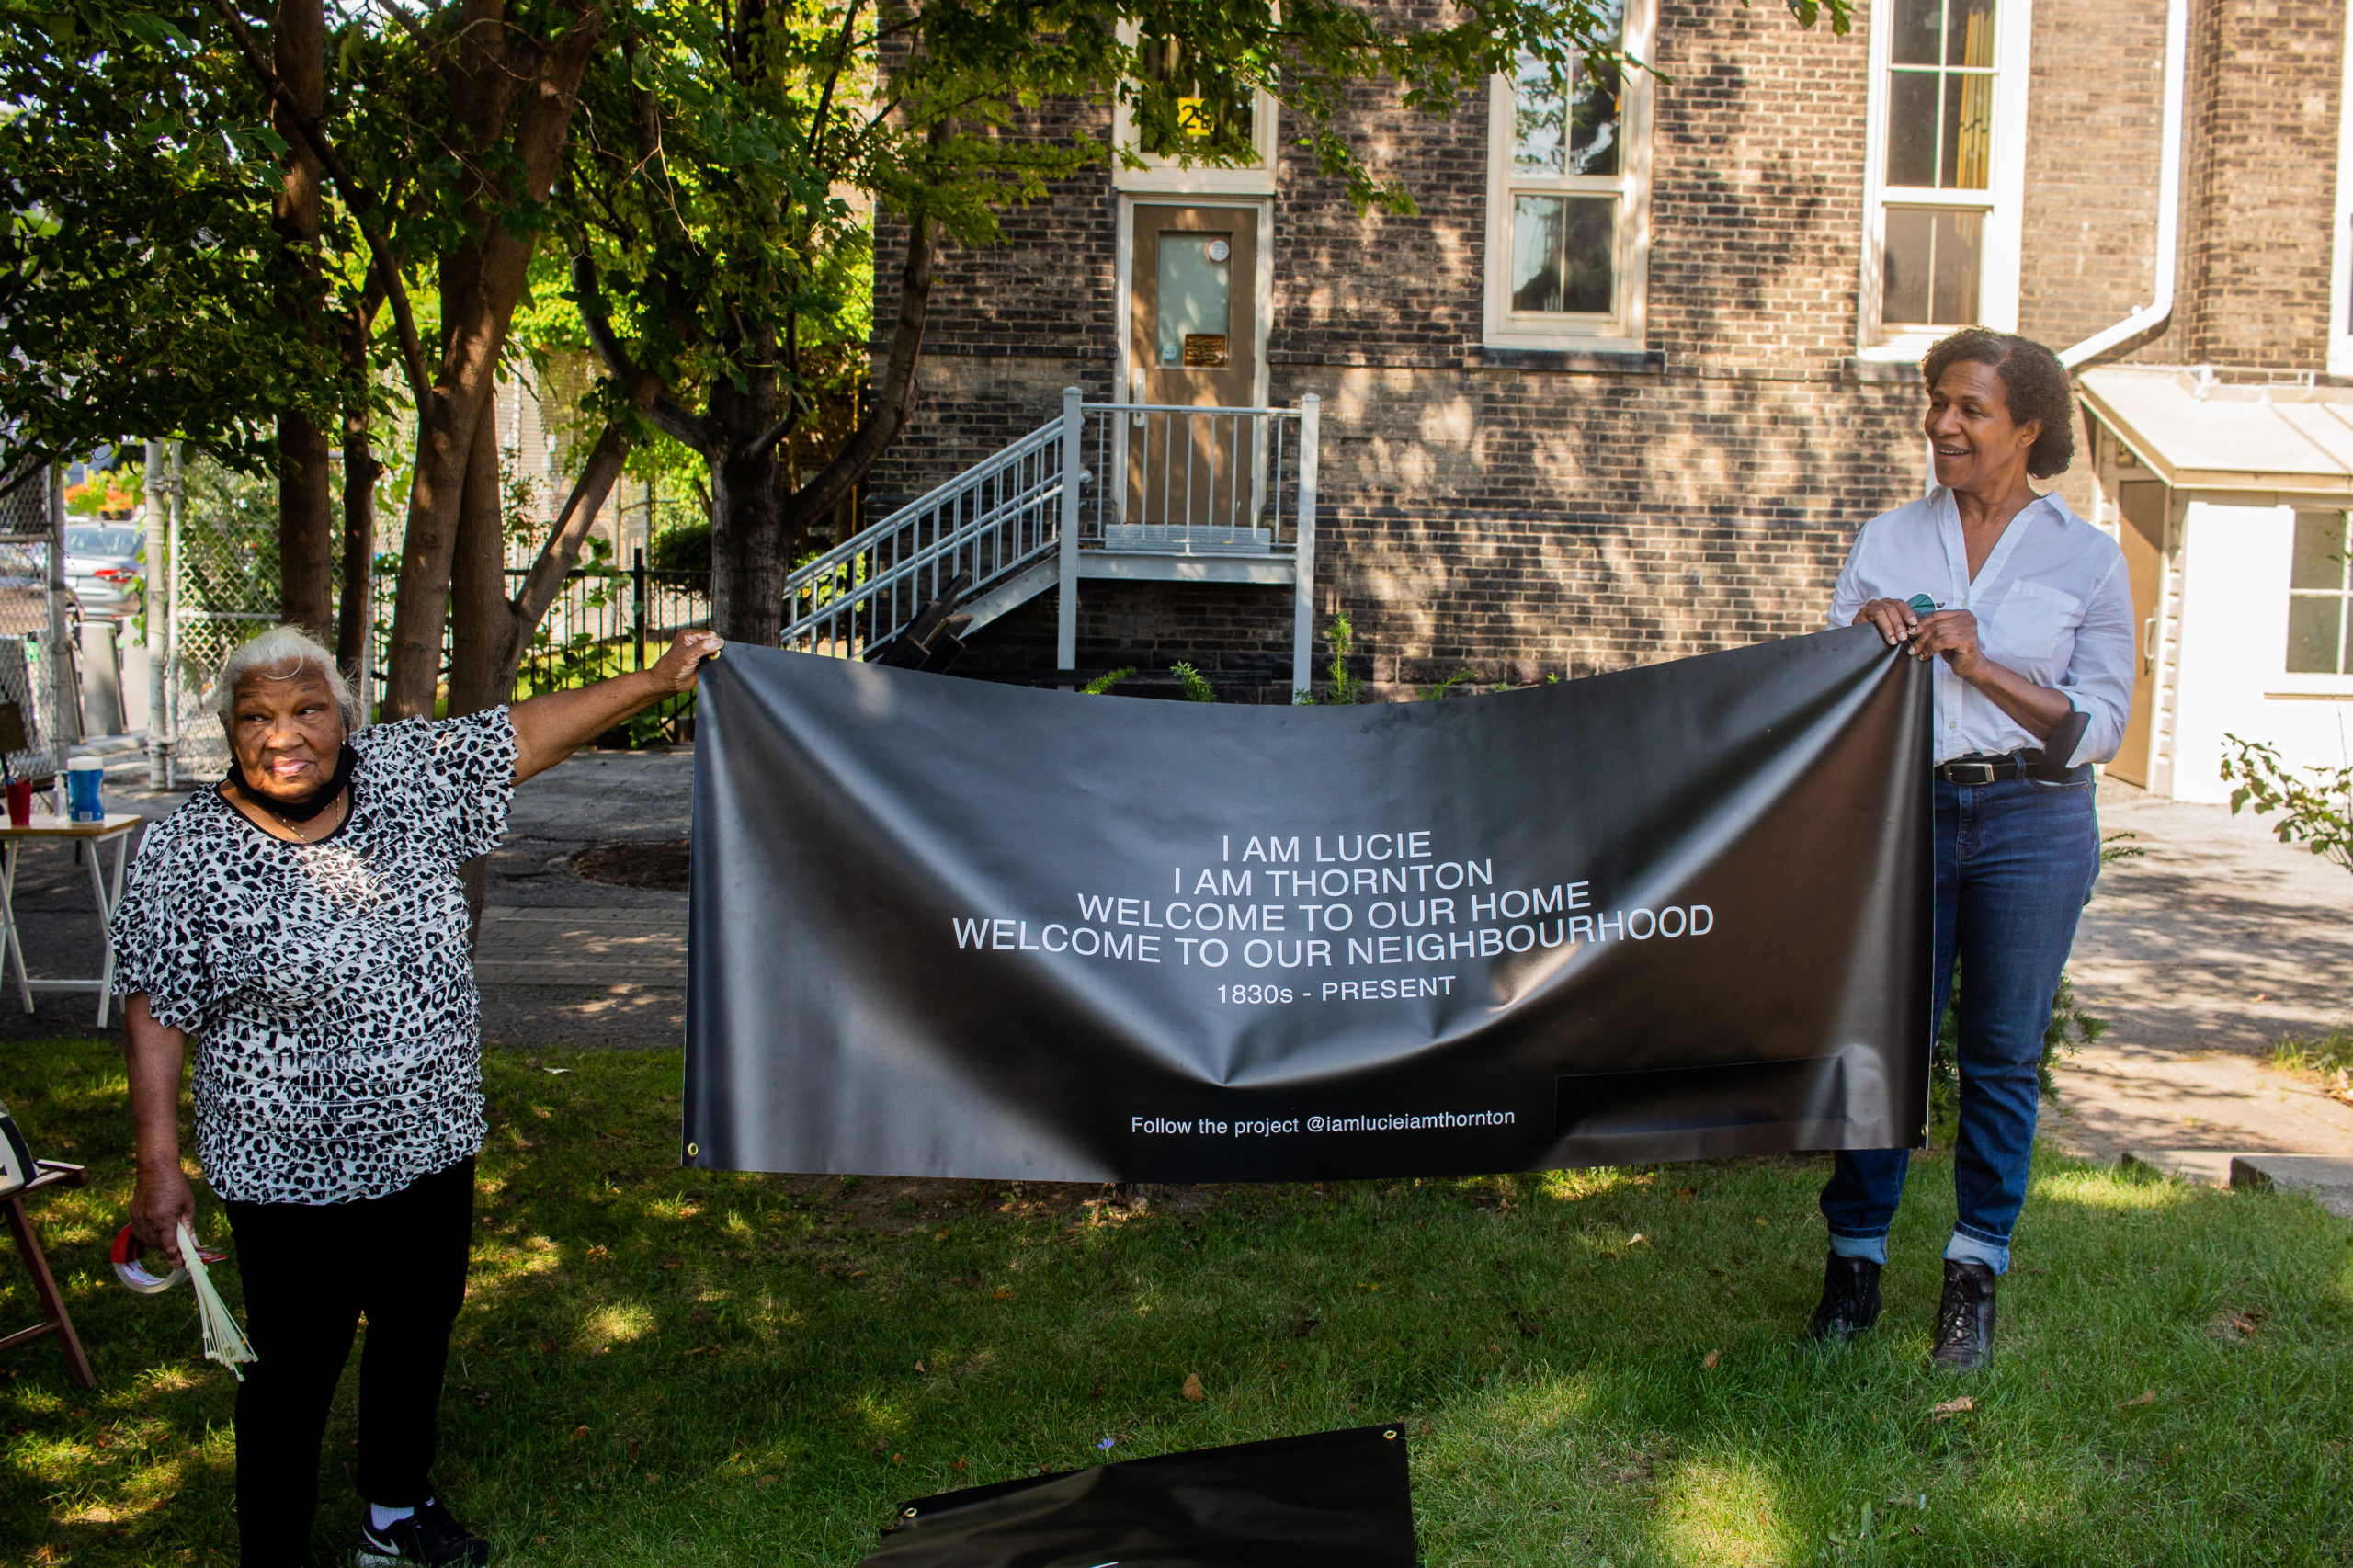 Photo of Charmaine Lurch and a woman holding up a black and white banner for her project "I Am Lucie, I Am Thornton". They are on the site of Lucie and Thornton's historical home, and there is grass and trees surrounding it.